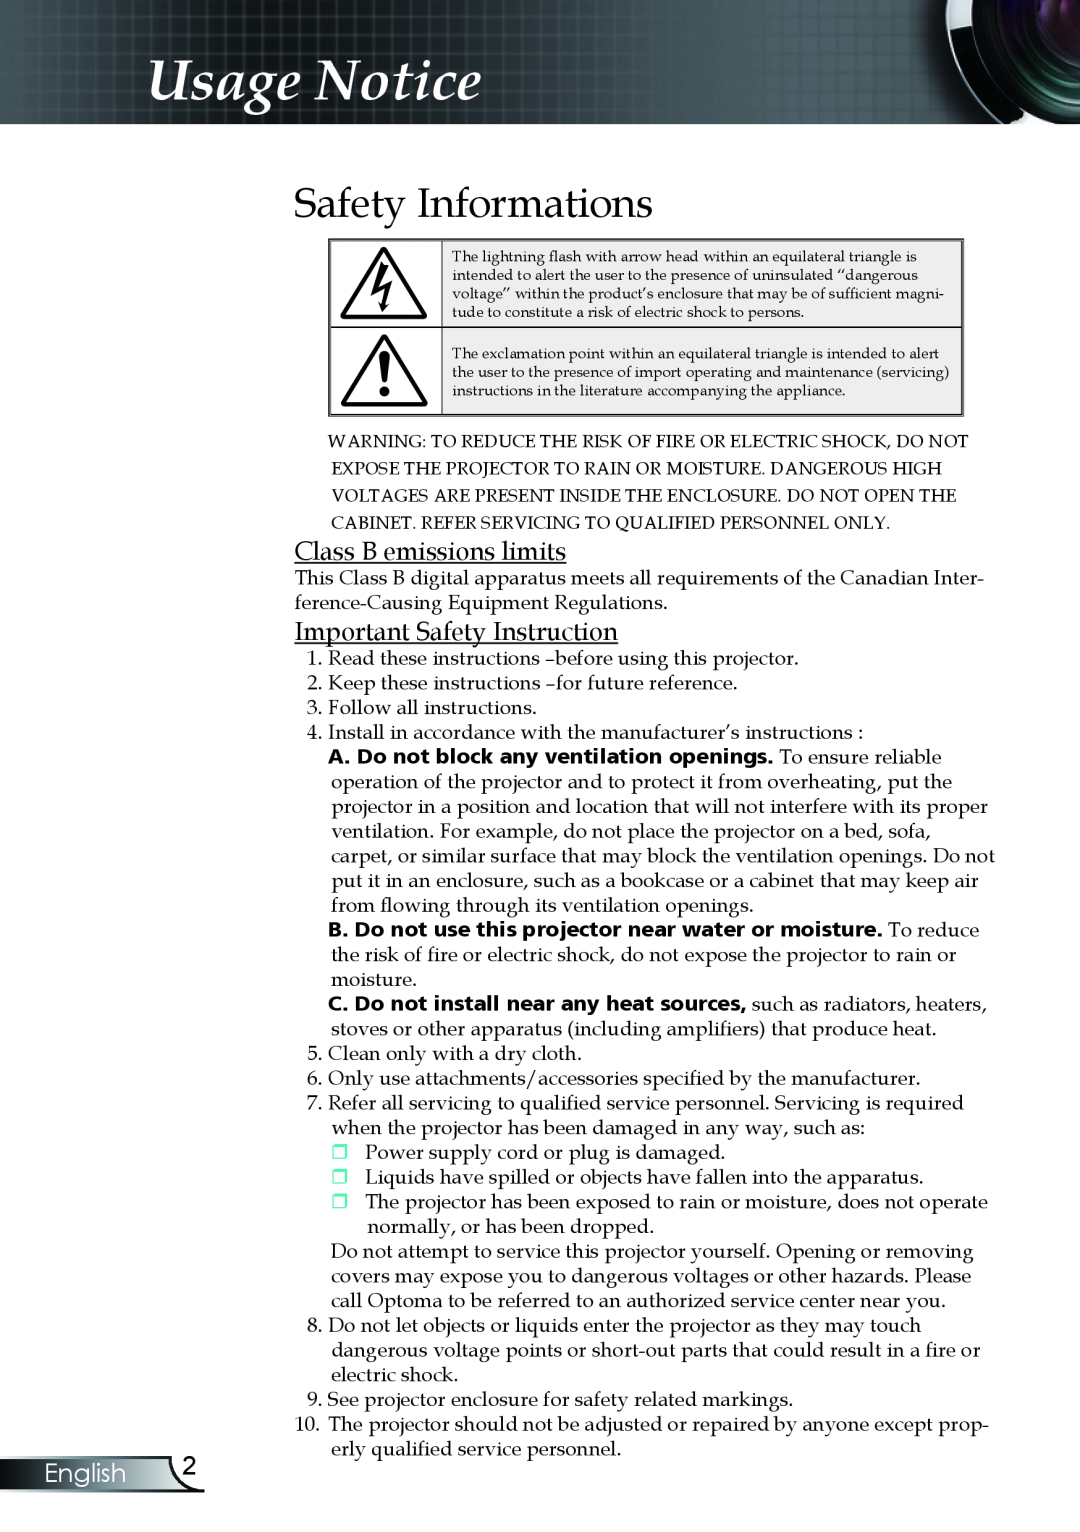 Optoma Technology TX330 manual Usage Notice, Safety Informations, English, Class B emissions limits 